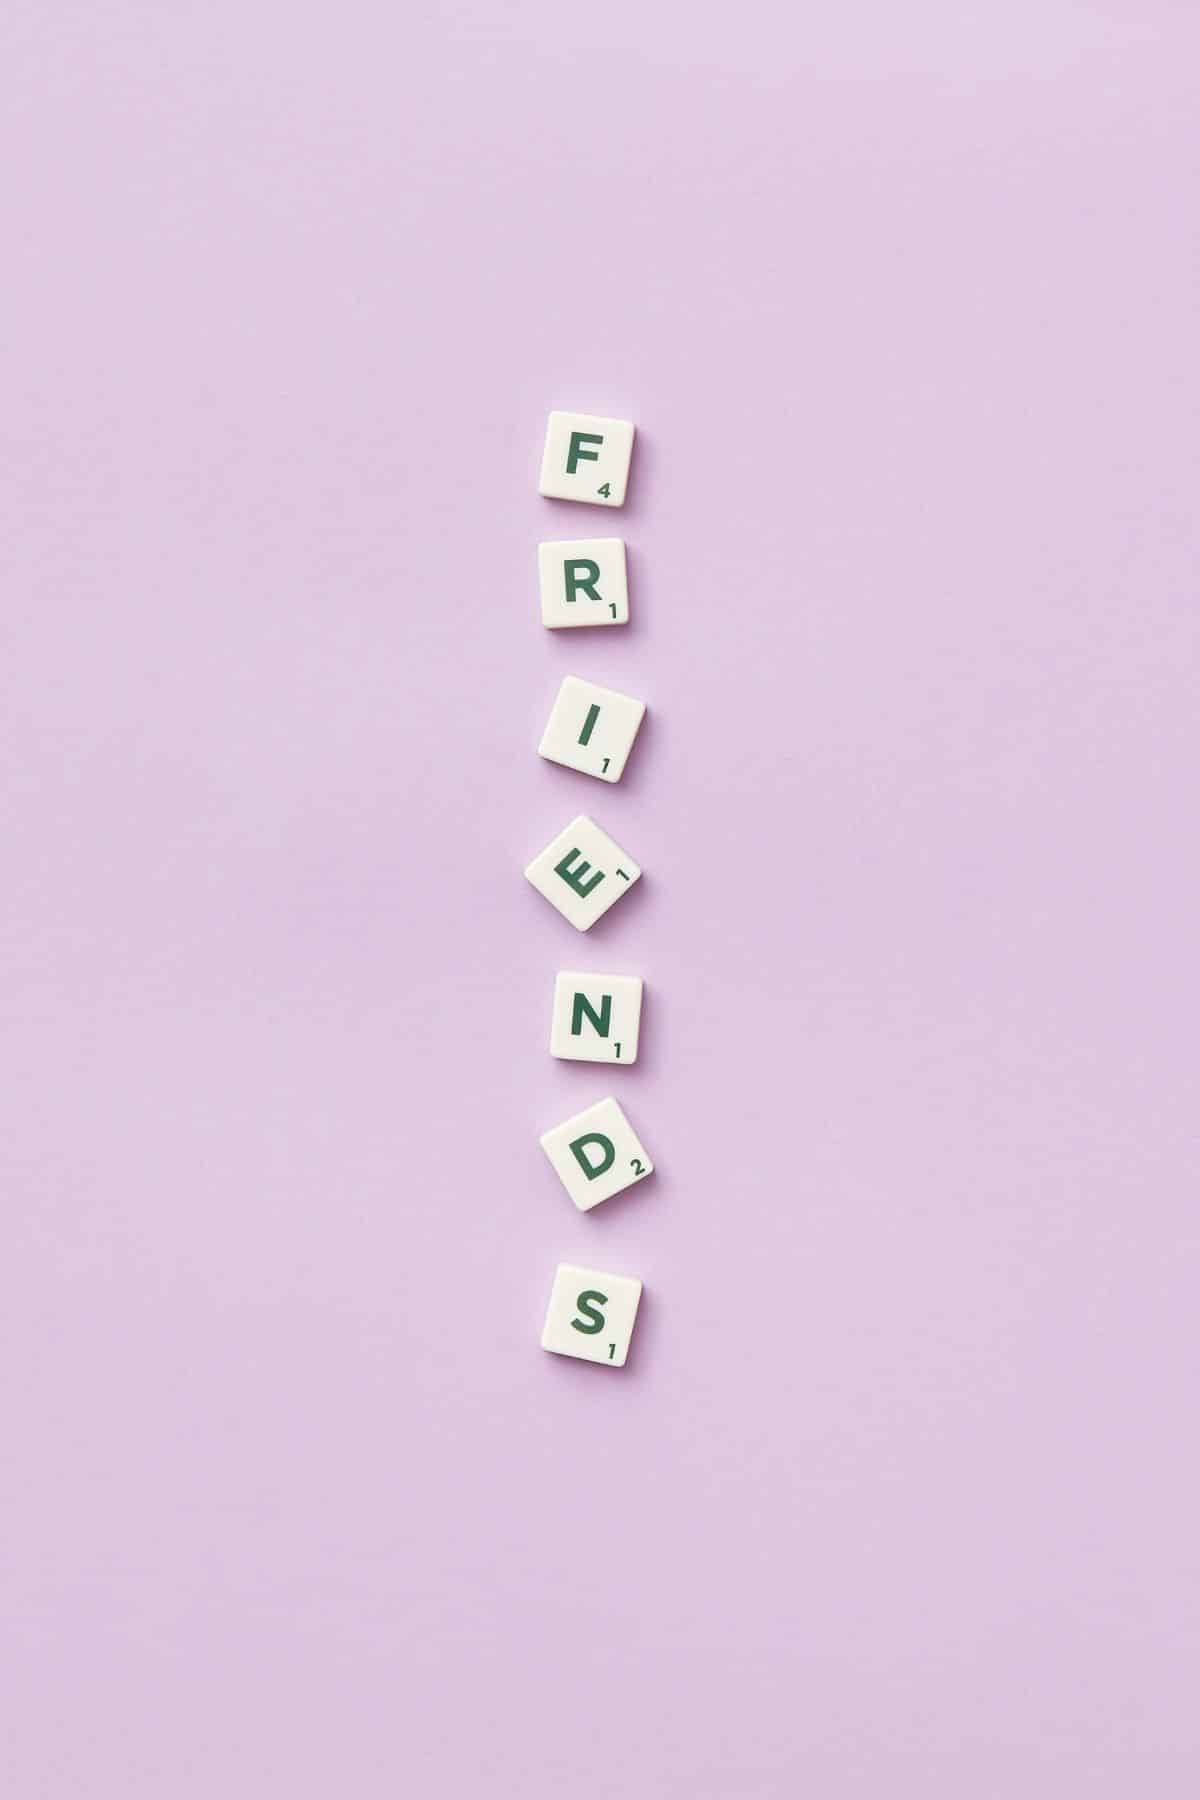 This is a picture of Scrabble tiles vertically spelling the word "Friends".  There is a purple background.